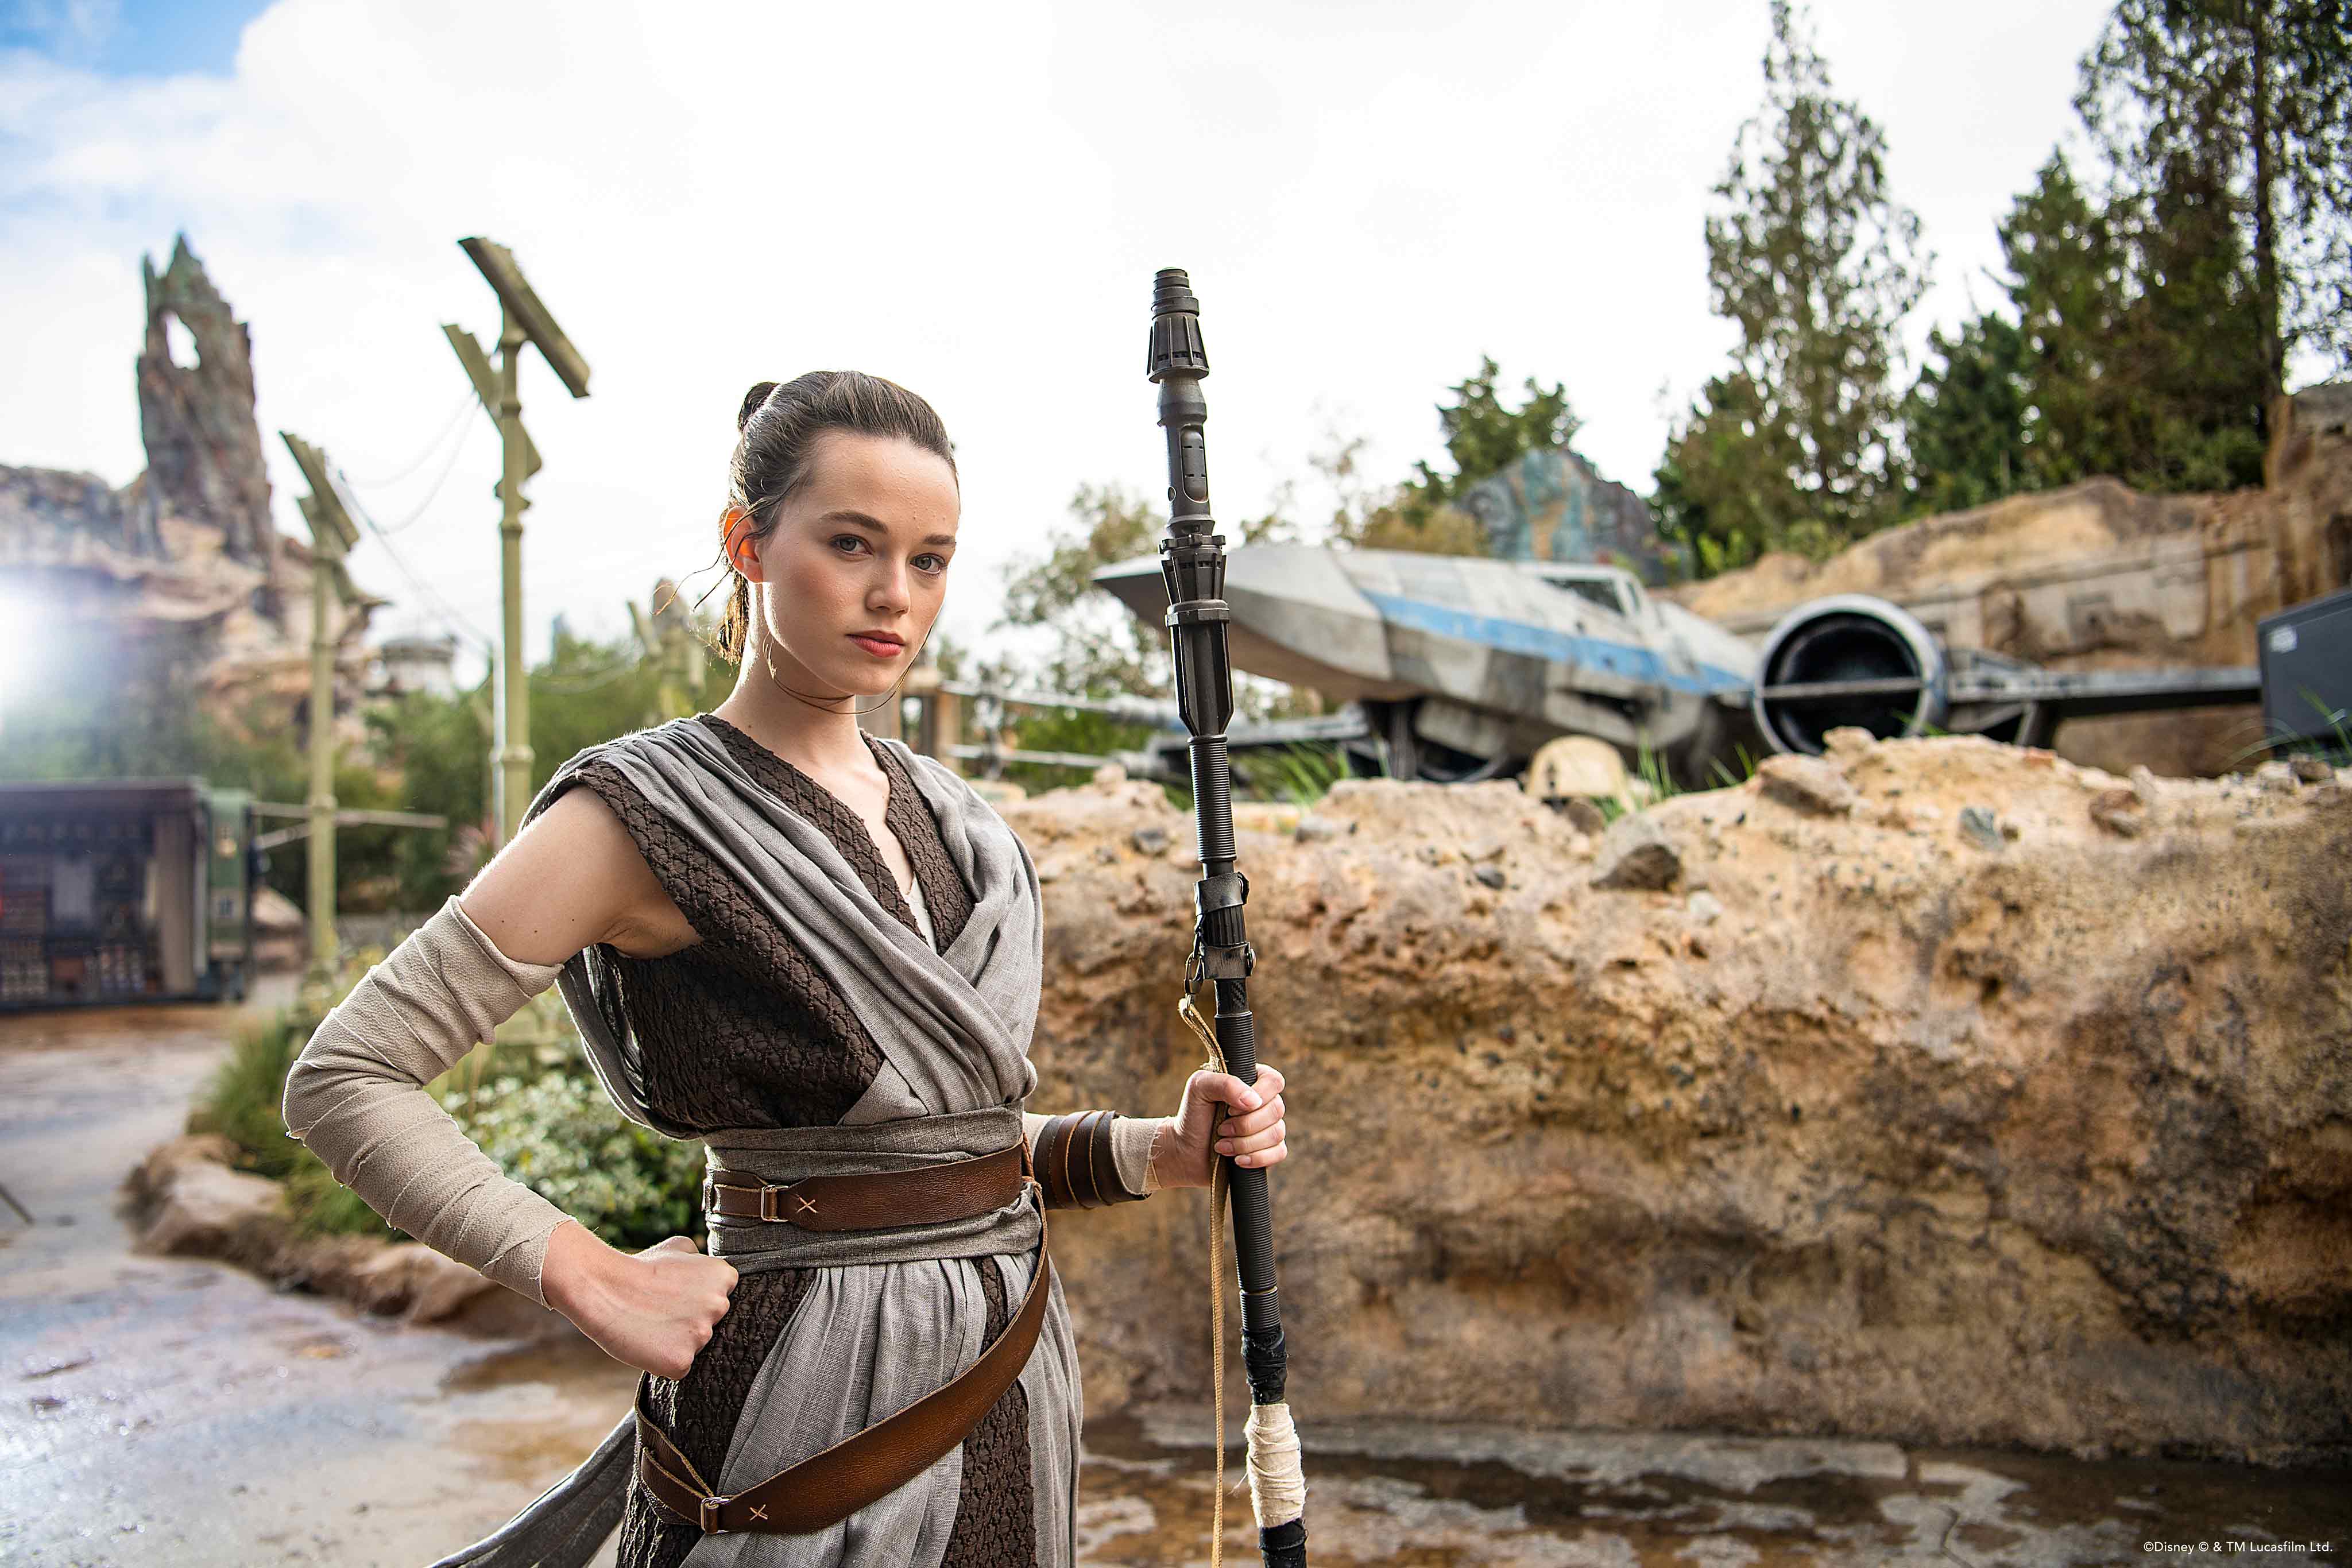 Rey posing for the photo during the daytime in Batuu inside of Star Wars: Galaxy's Edge at Disney's Hollywood Studios®. Lake Buena Vista, Florida.